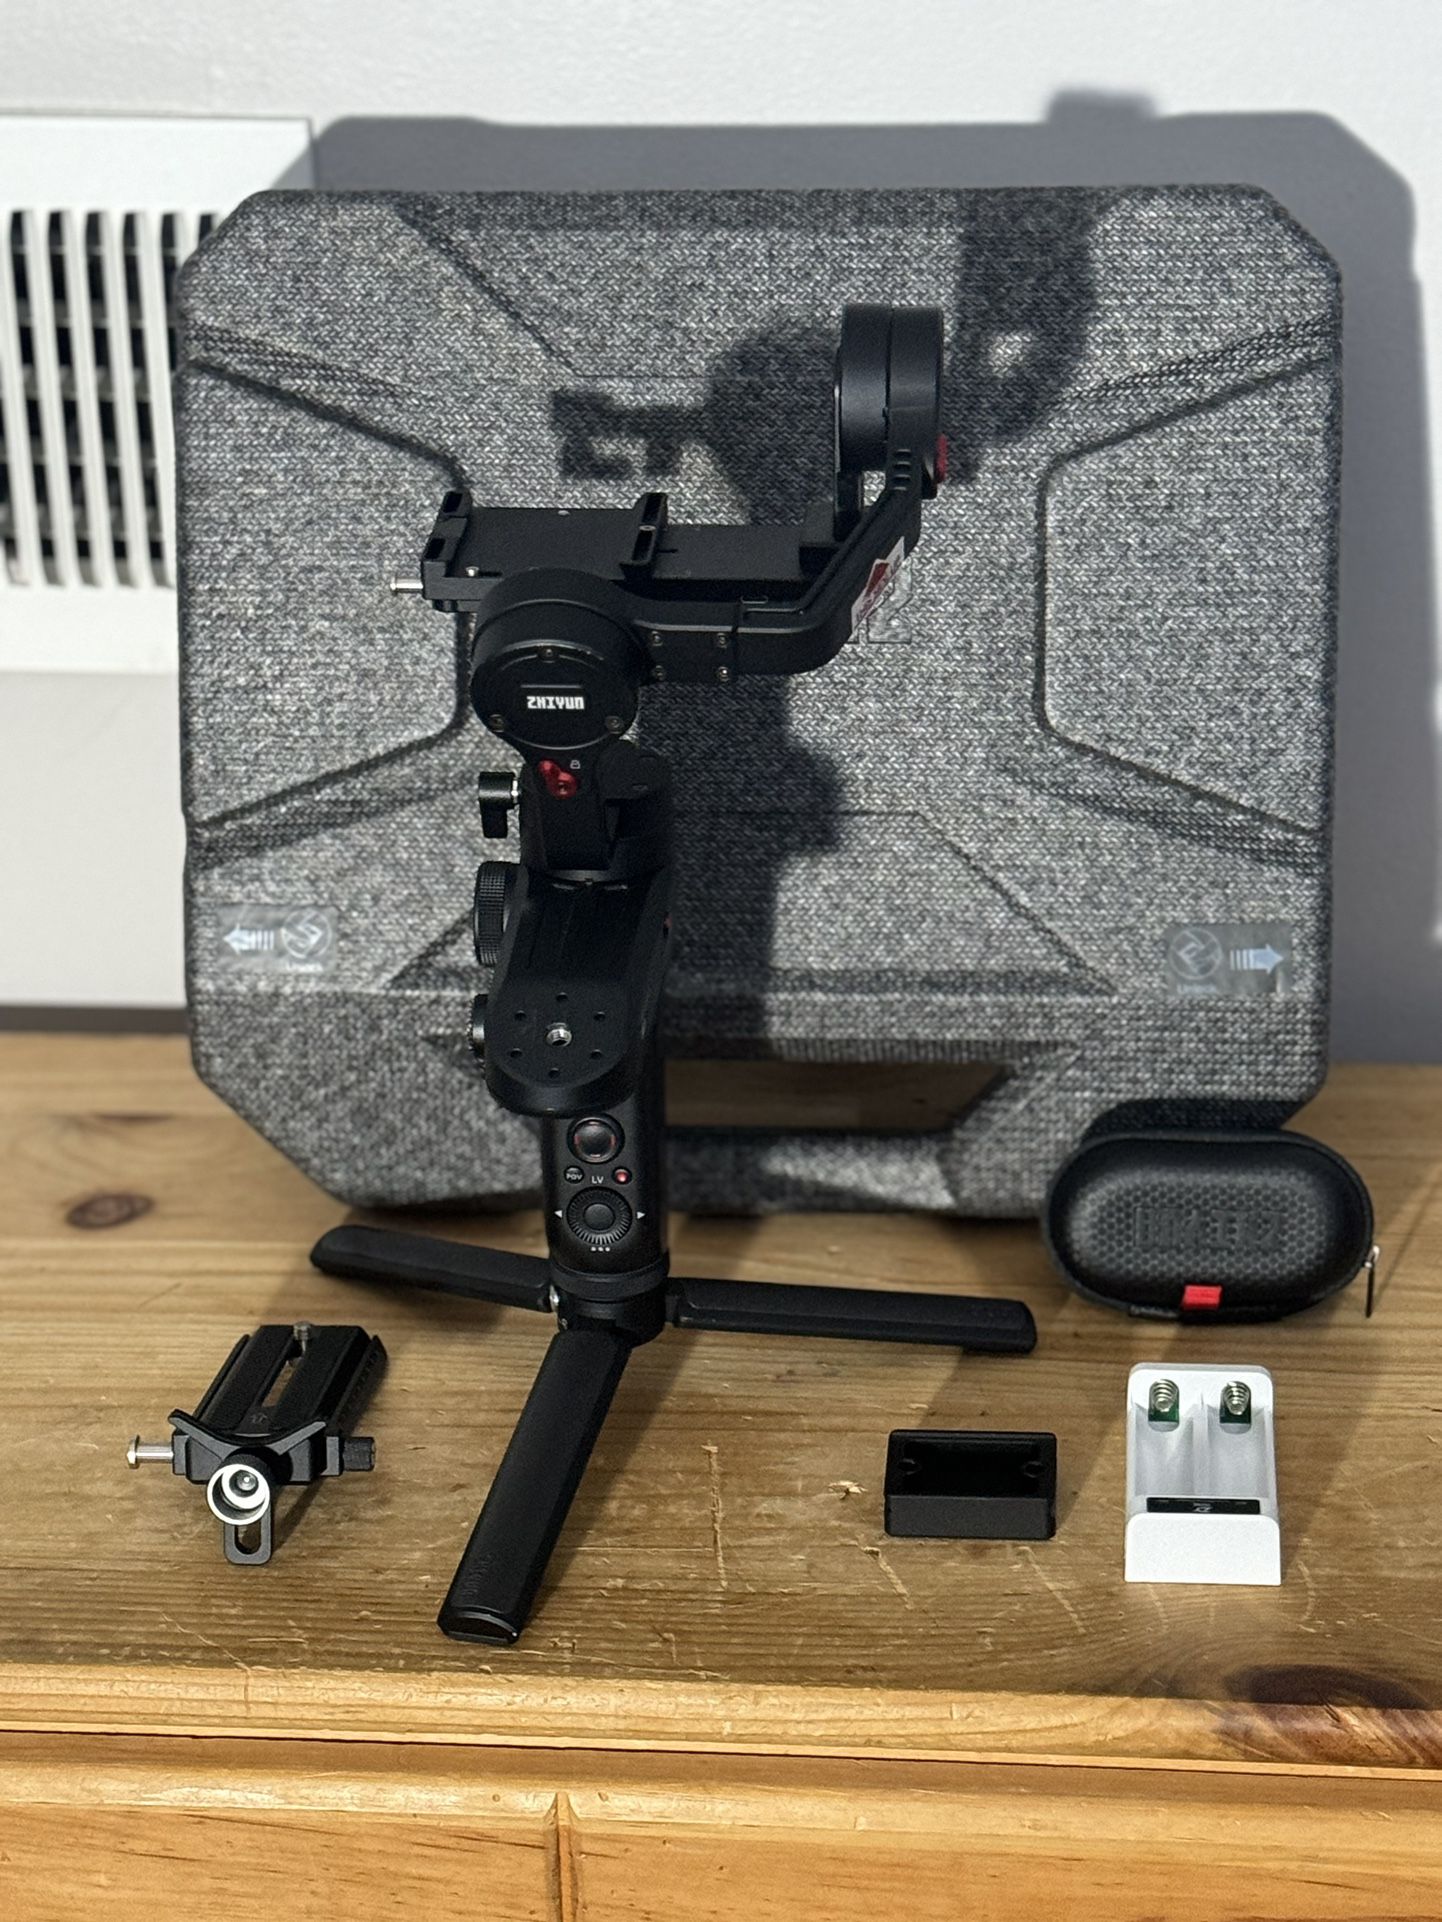  Zhiyun Weebill Lab Camera Gimbal (Includes: Gimbal, Camera connector cables, and Case)